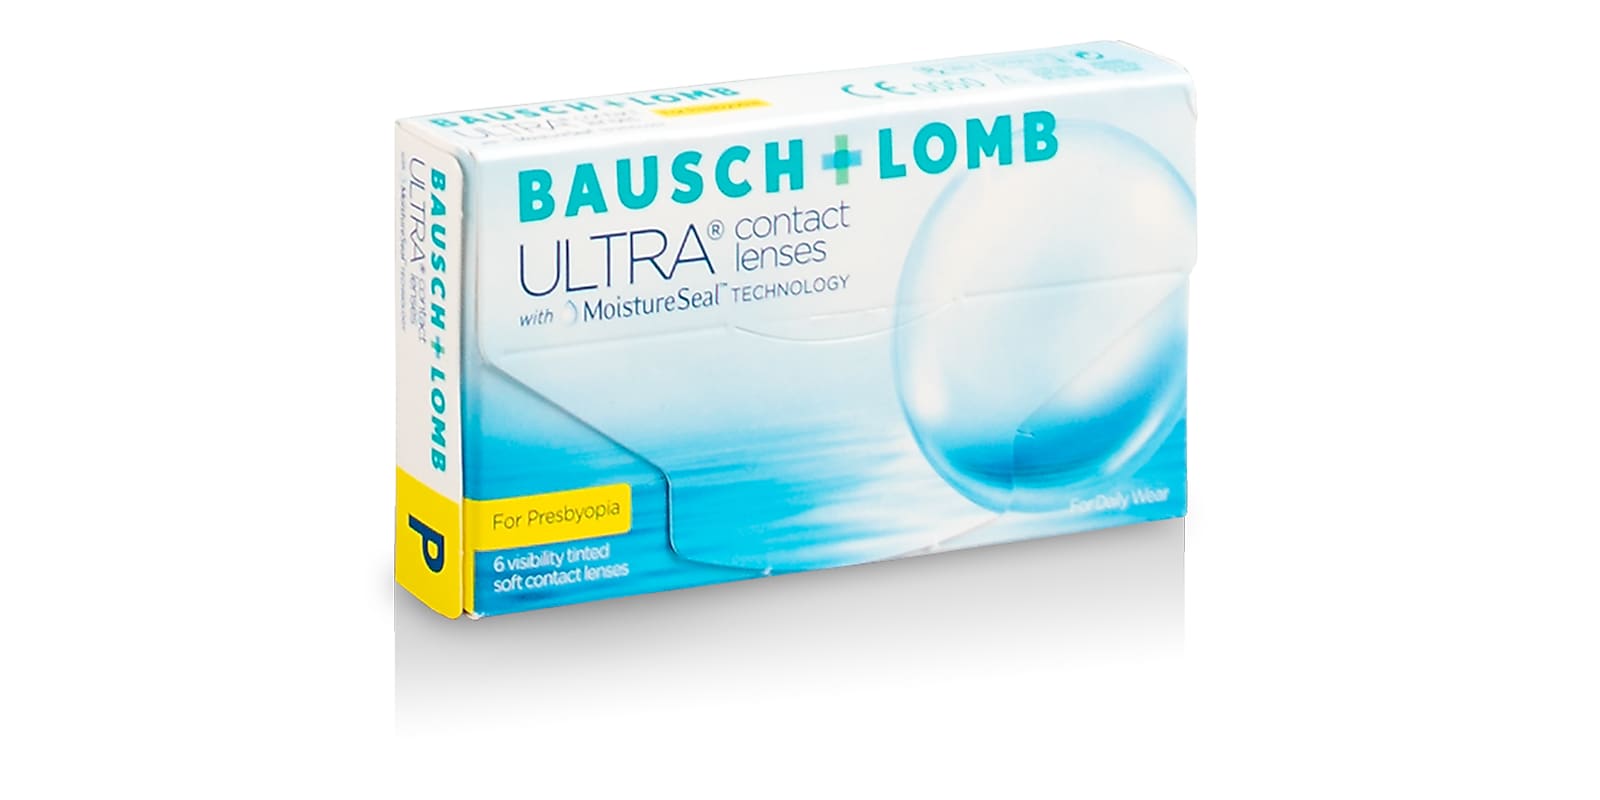 Ultra for Presbyopia, 6 pack contact lenses